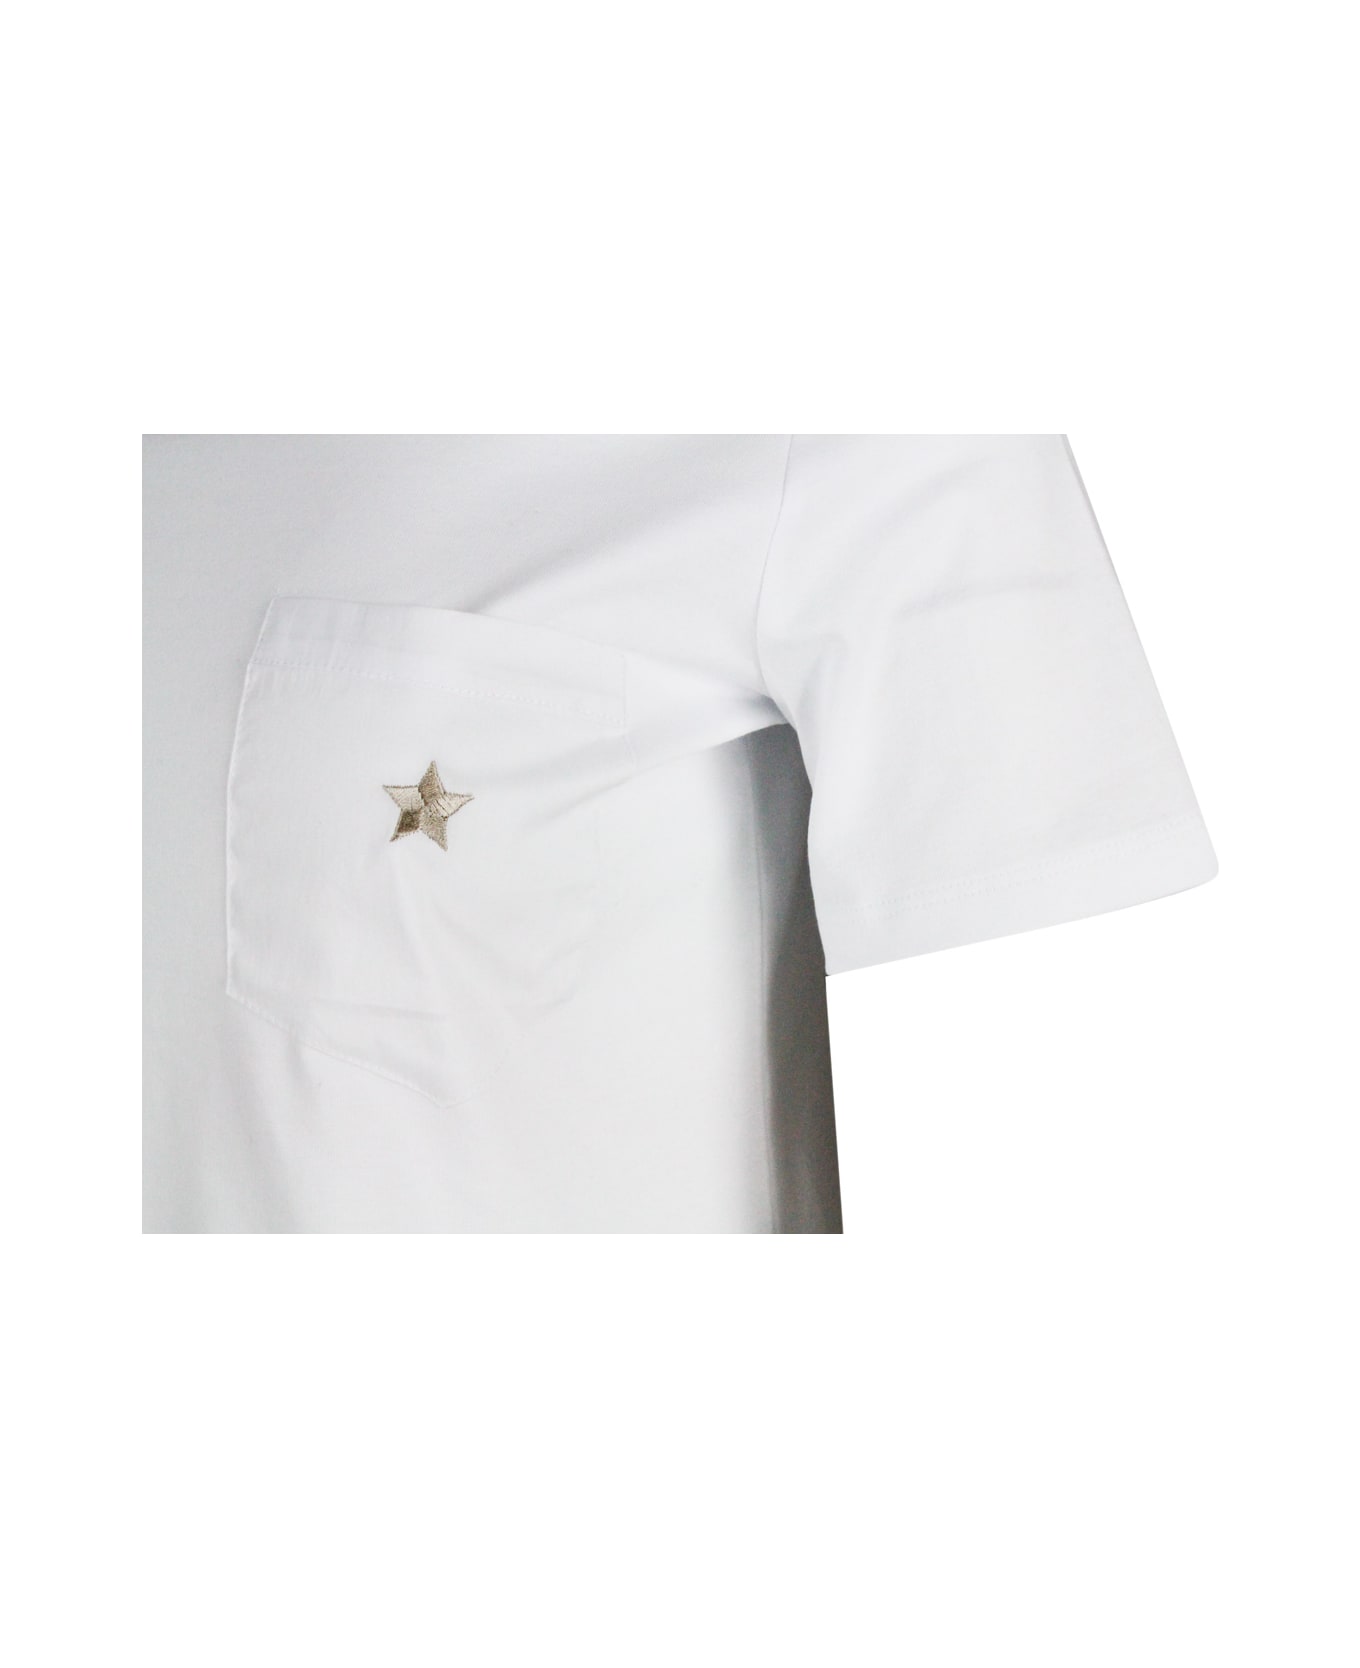 Lorena Antoniazzi Short-sleeved Round-neck Cotton zip-up T-shirt With Chest Pocket And Embroidered Star - White